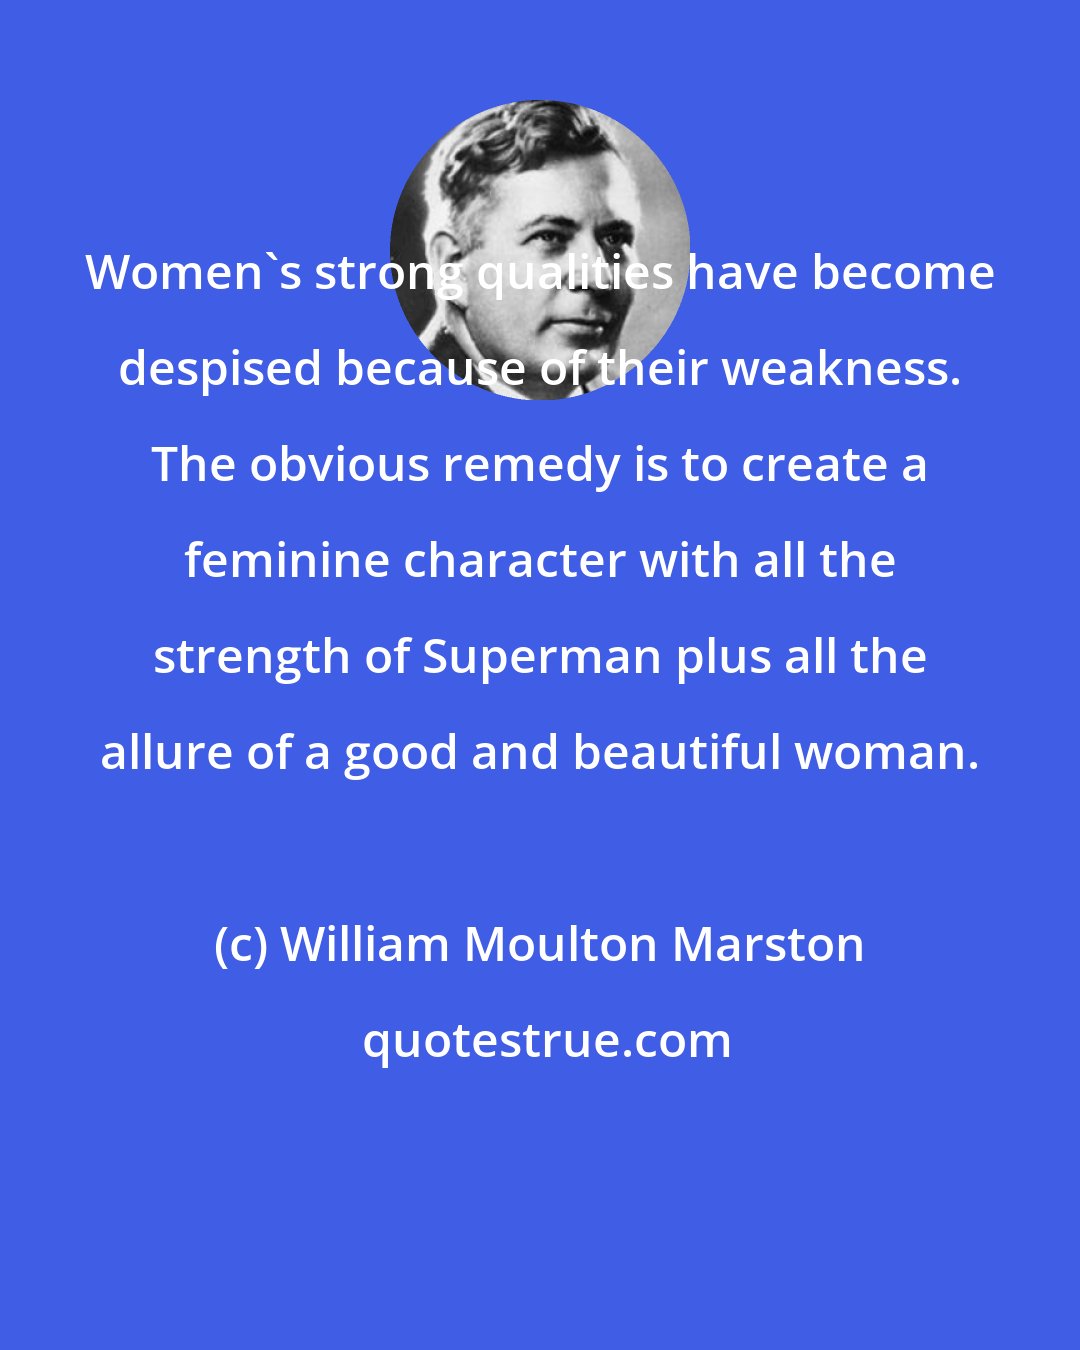 William Moulton Marston: Women's strong qualities have become despised because of their weakness. The obvious remedy is to create a feminine character with all the strength of Superman plus all the allure of a good and beautiful woman.